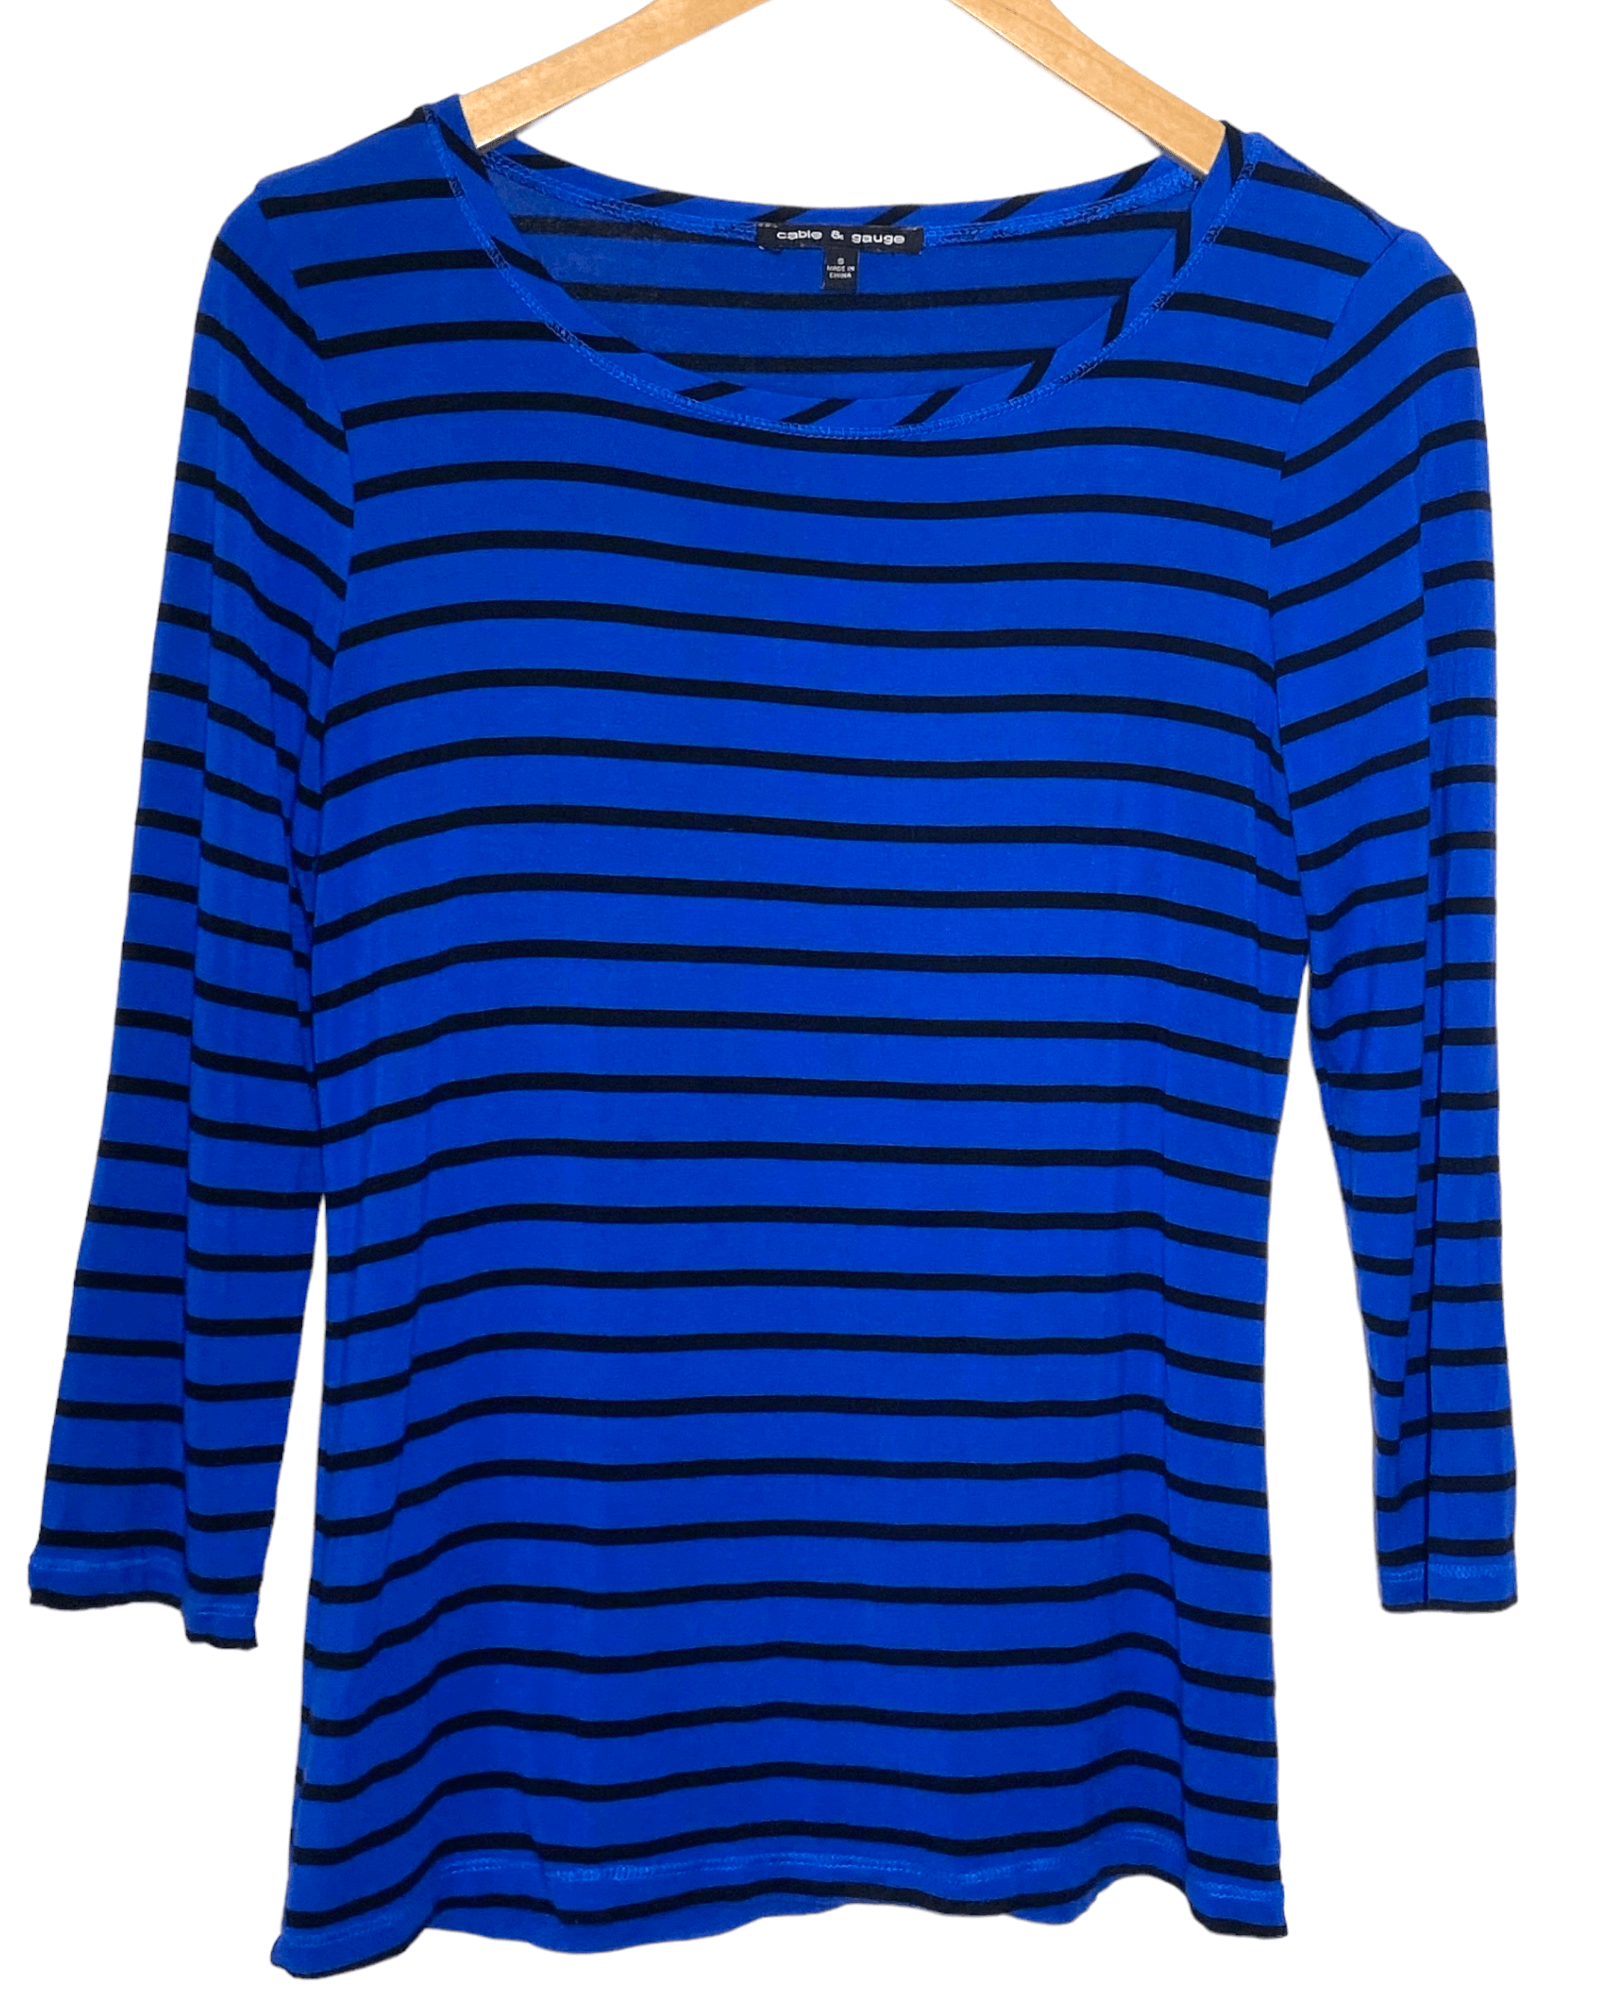 Bright Winter CABLE & GAUGE cobalt and black stripe top